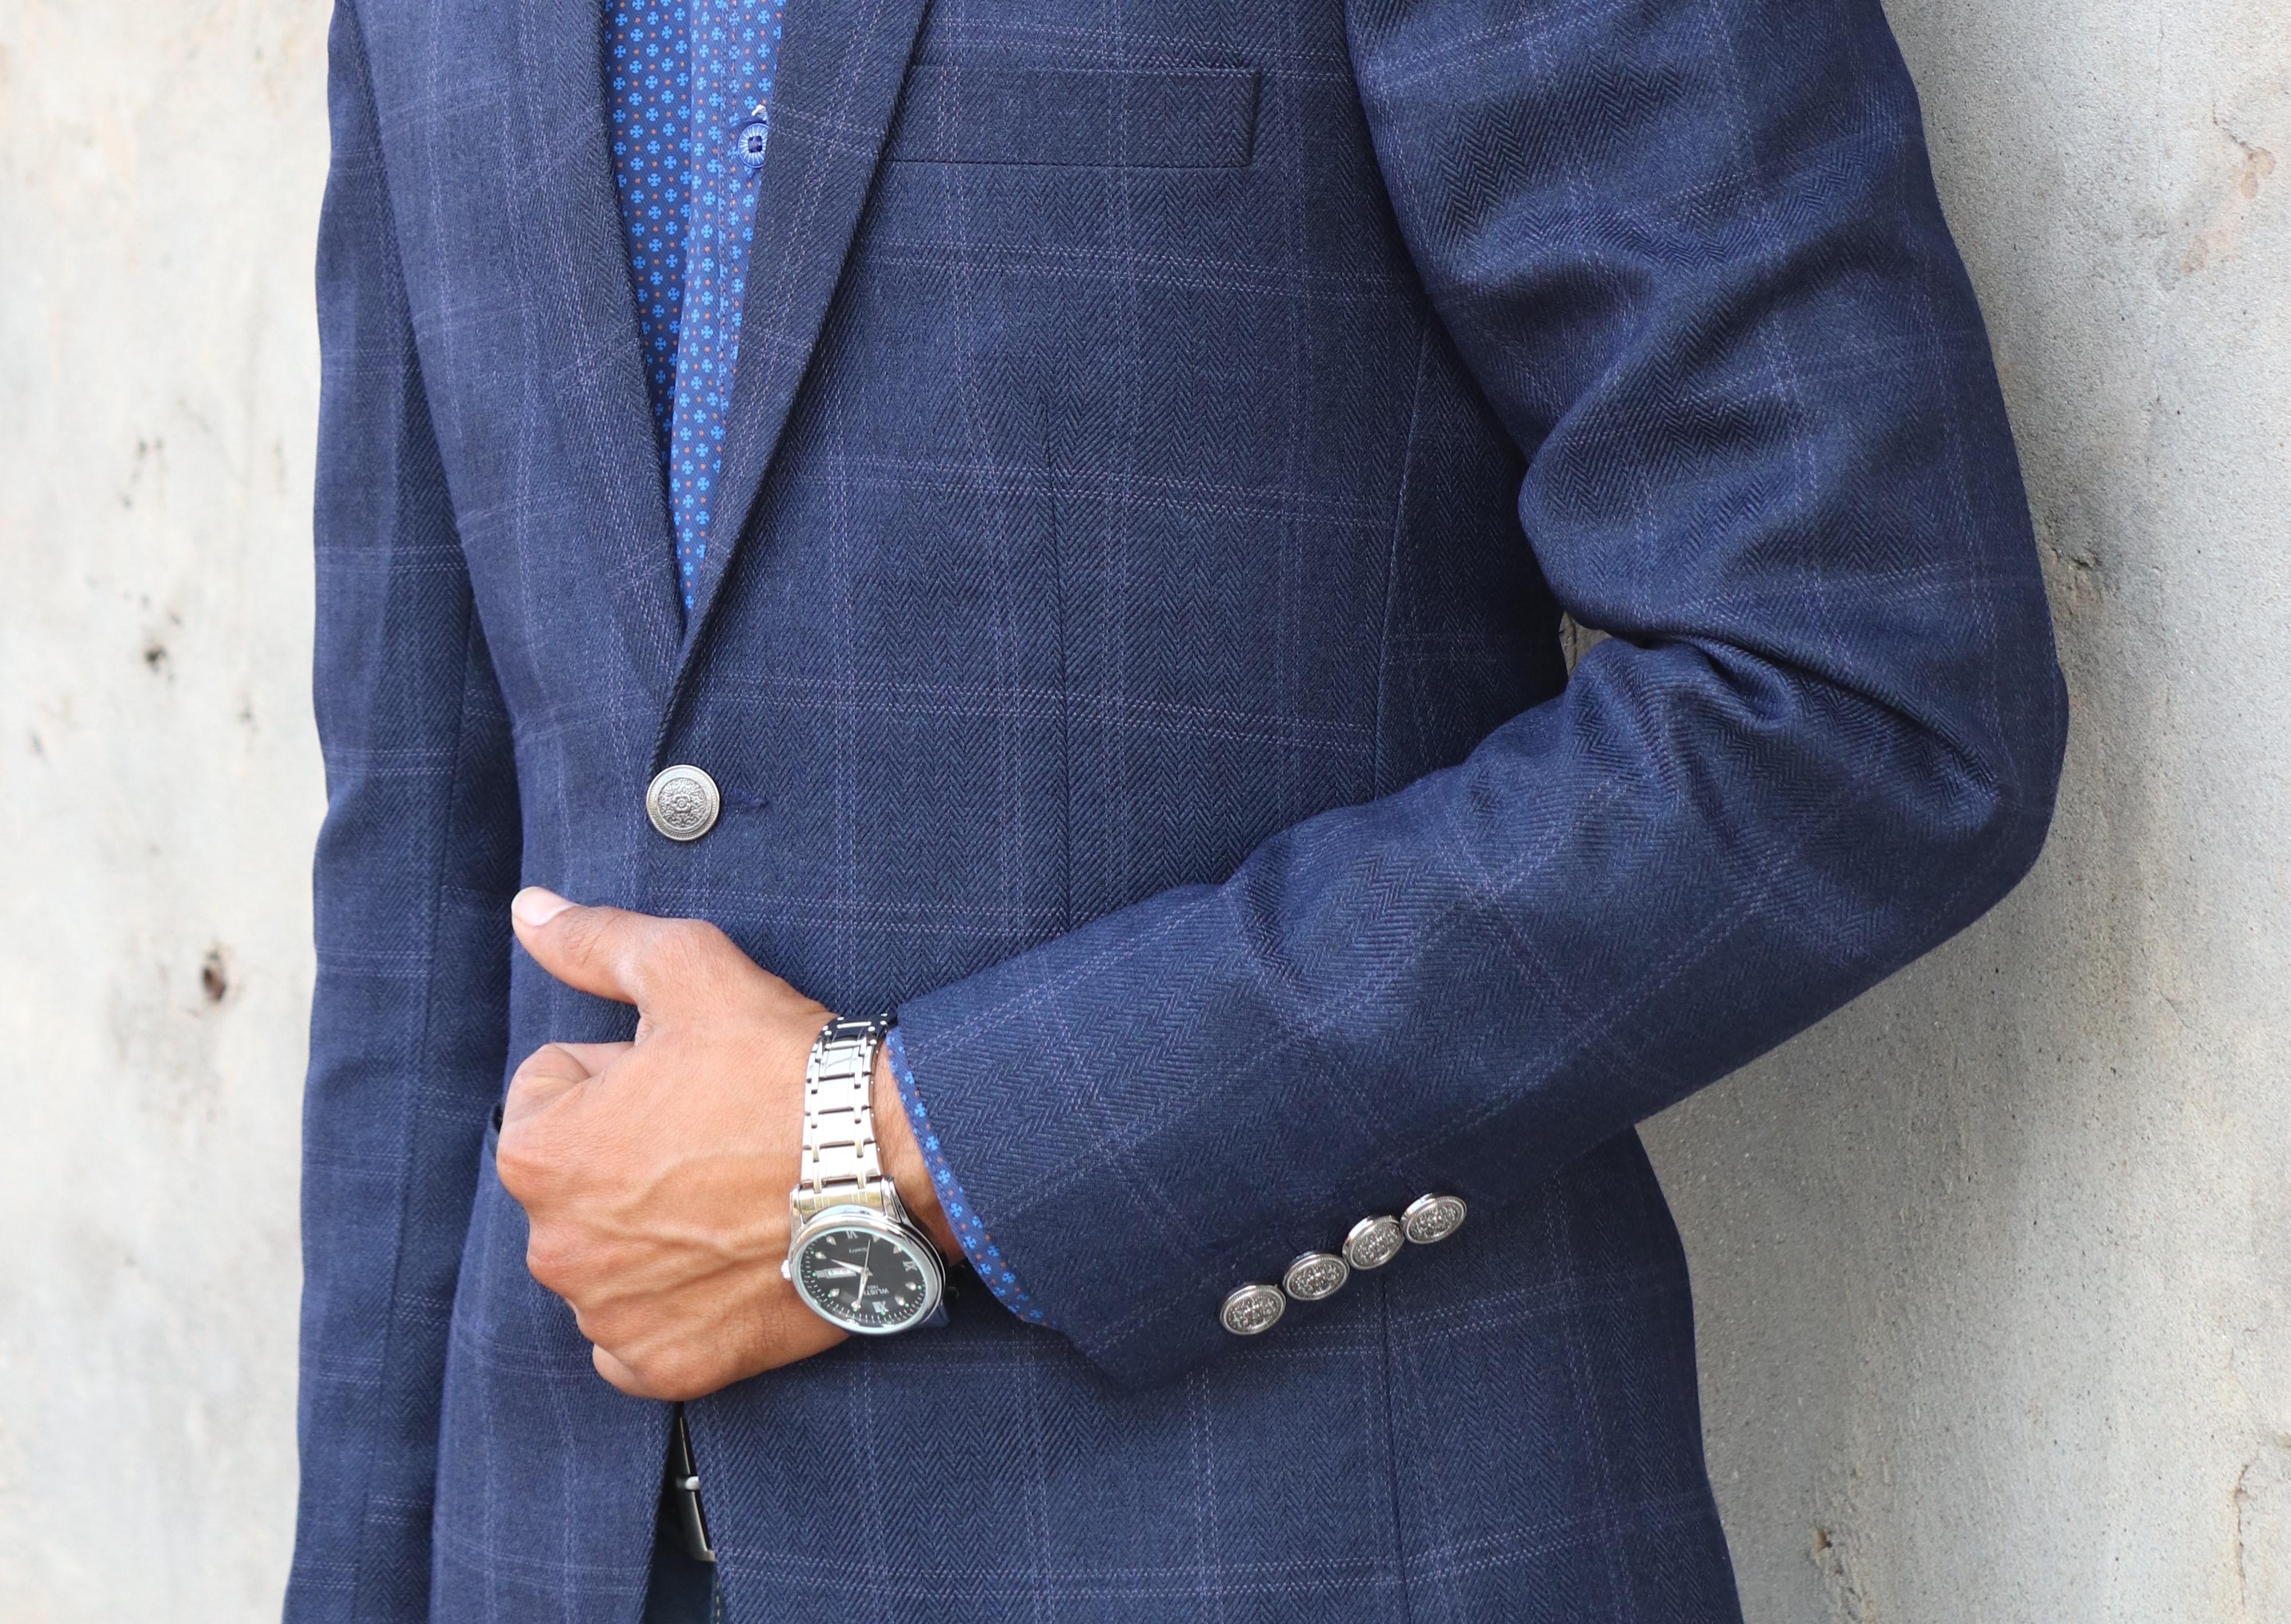 Men's Fashion: Understanding the Difference Between Sports Jackets,  Blazers, and Suits